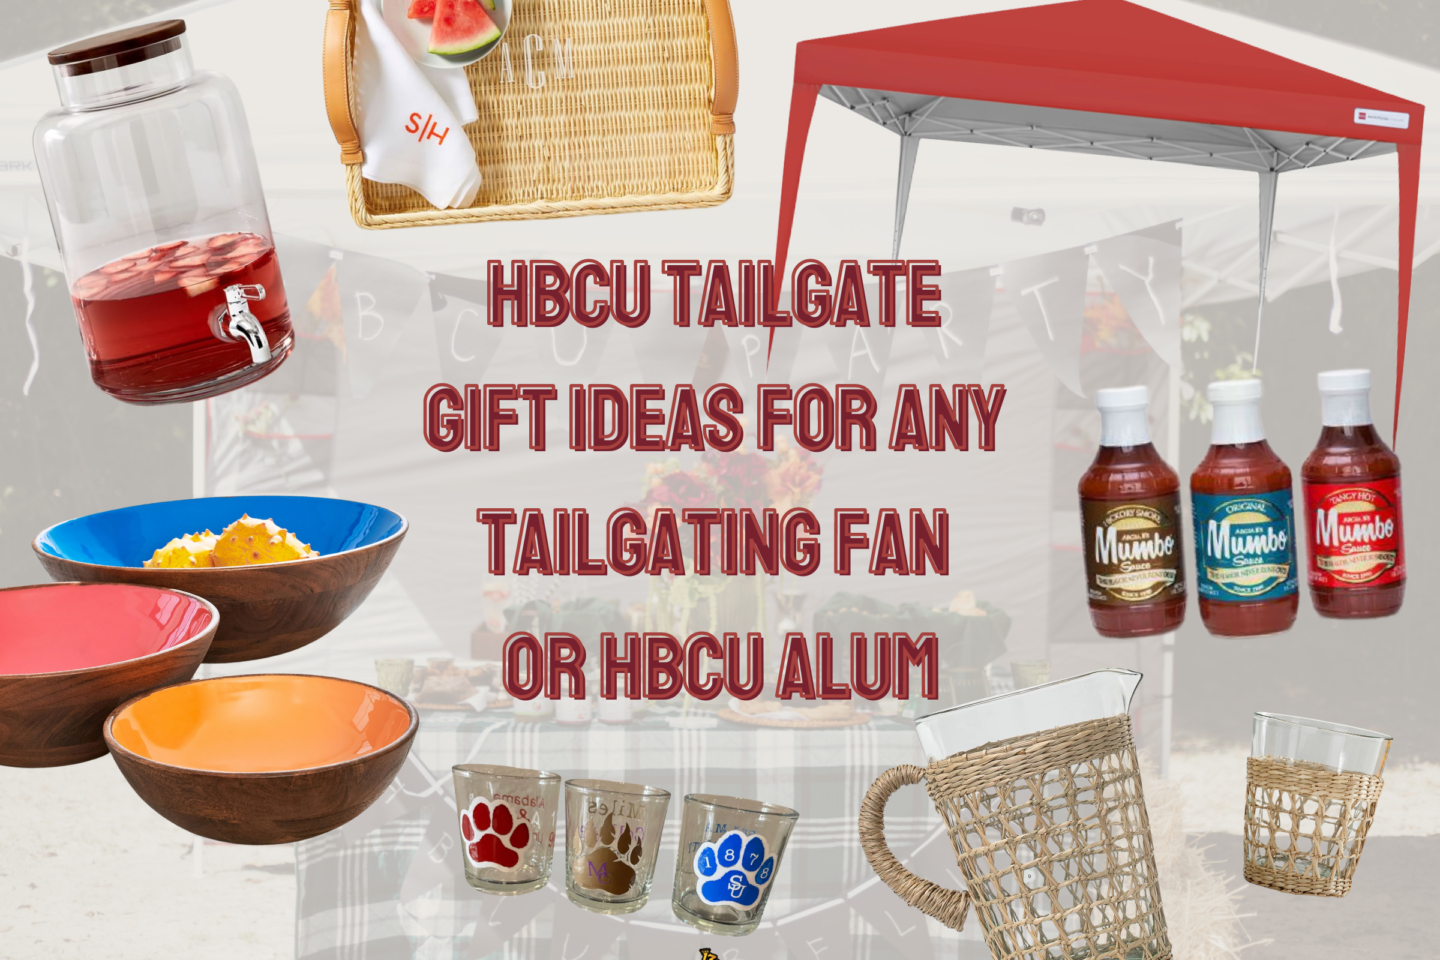 HBCU Tailgate Gift Ideas for any Tailgating Fan or HBCU Alum